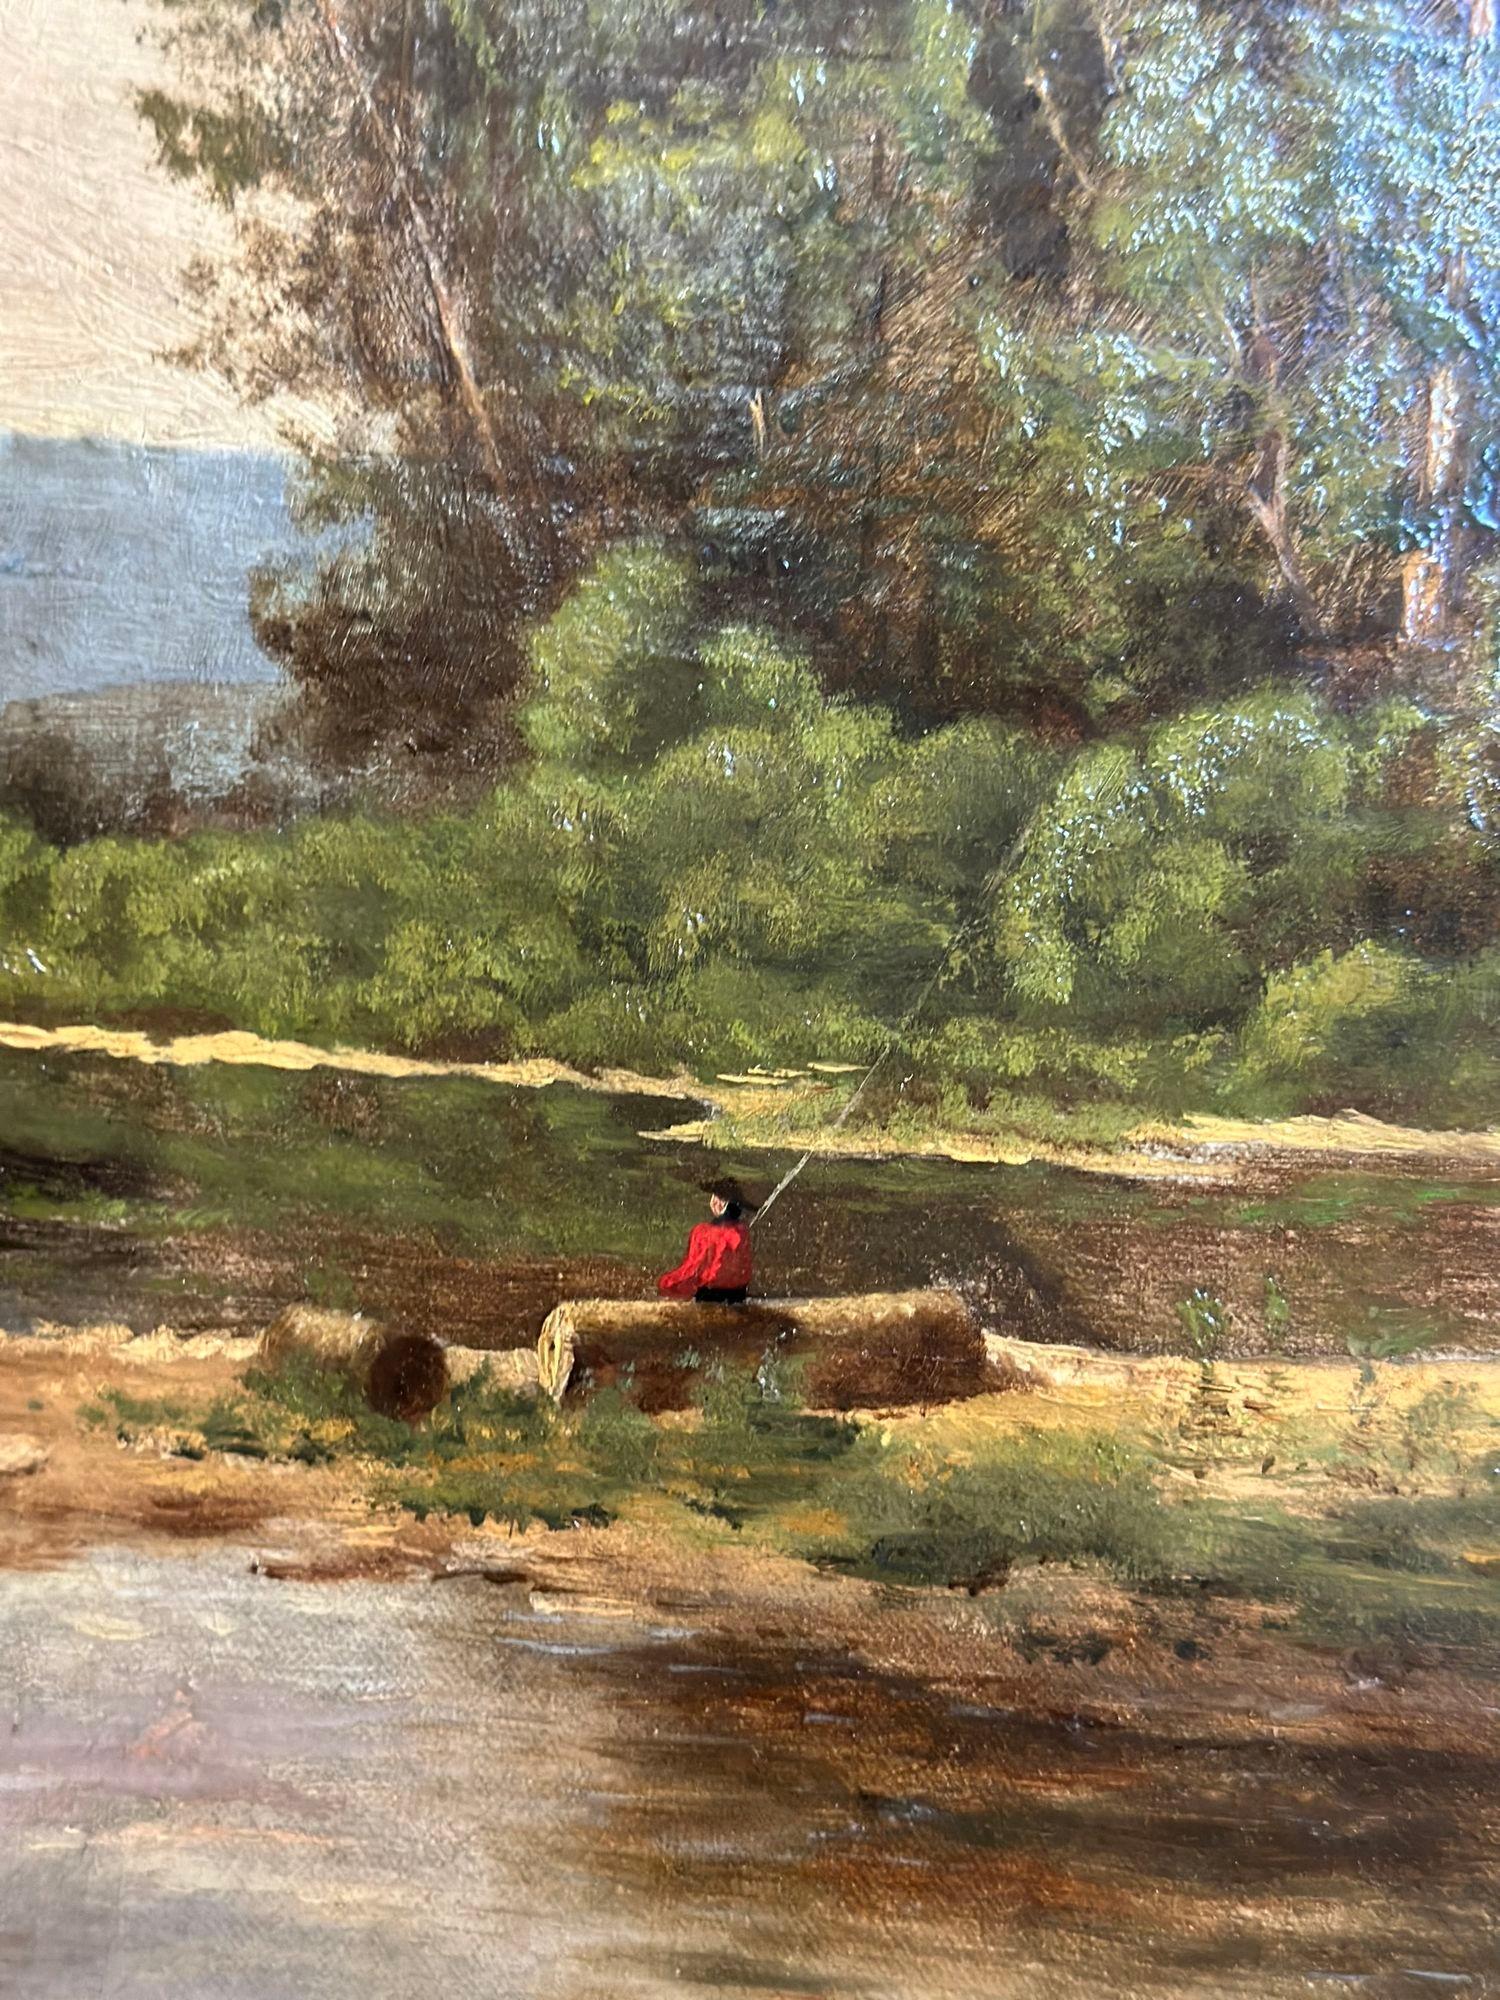 American school oil on canvas made in the 19th Century depicting a fisherman on a pond fishing on his own, conveying a sense of peaceful solitude.
Surrounding the pond, great scenery of flora unfolds. The abundance of nature is celebrated in every